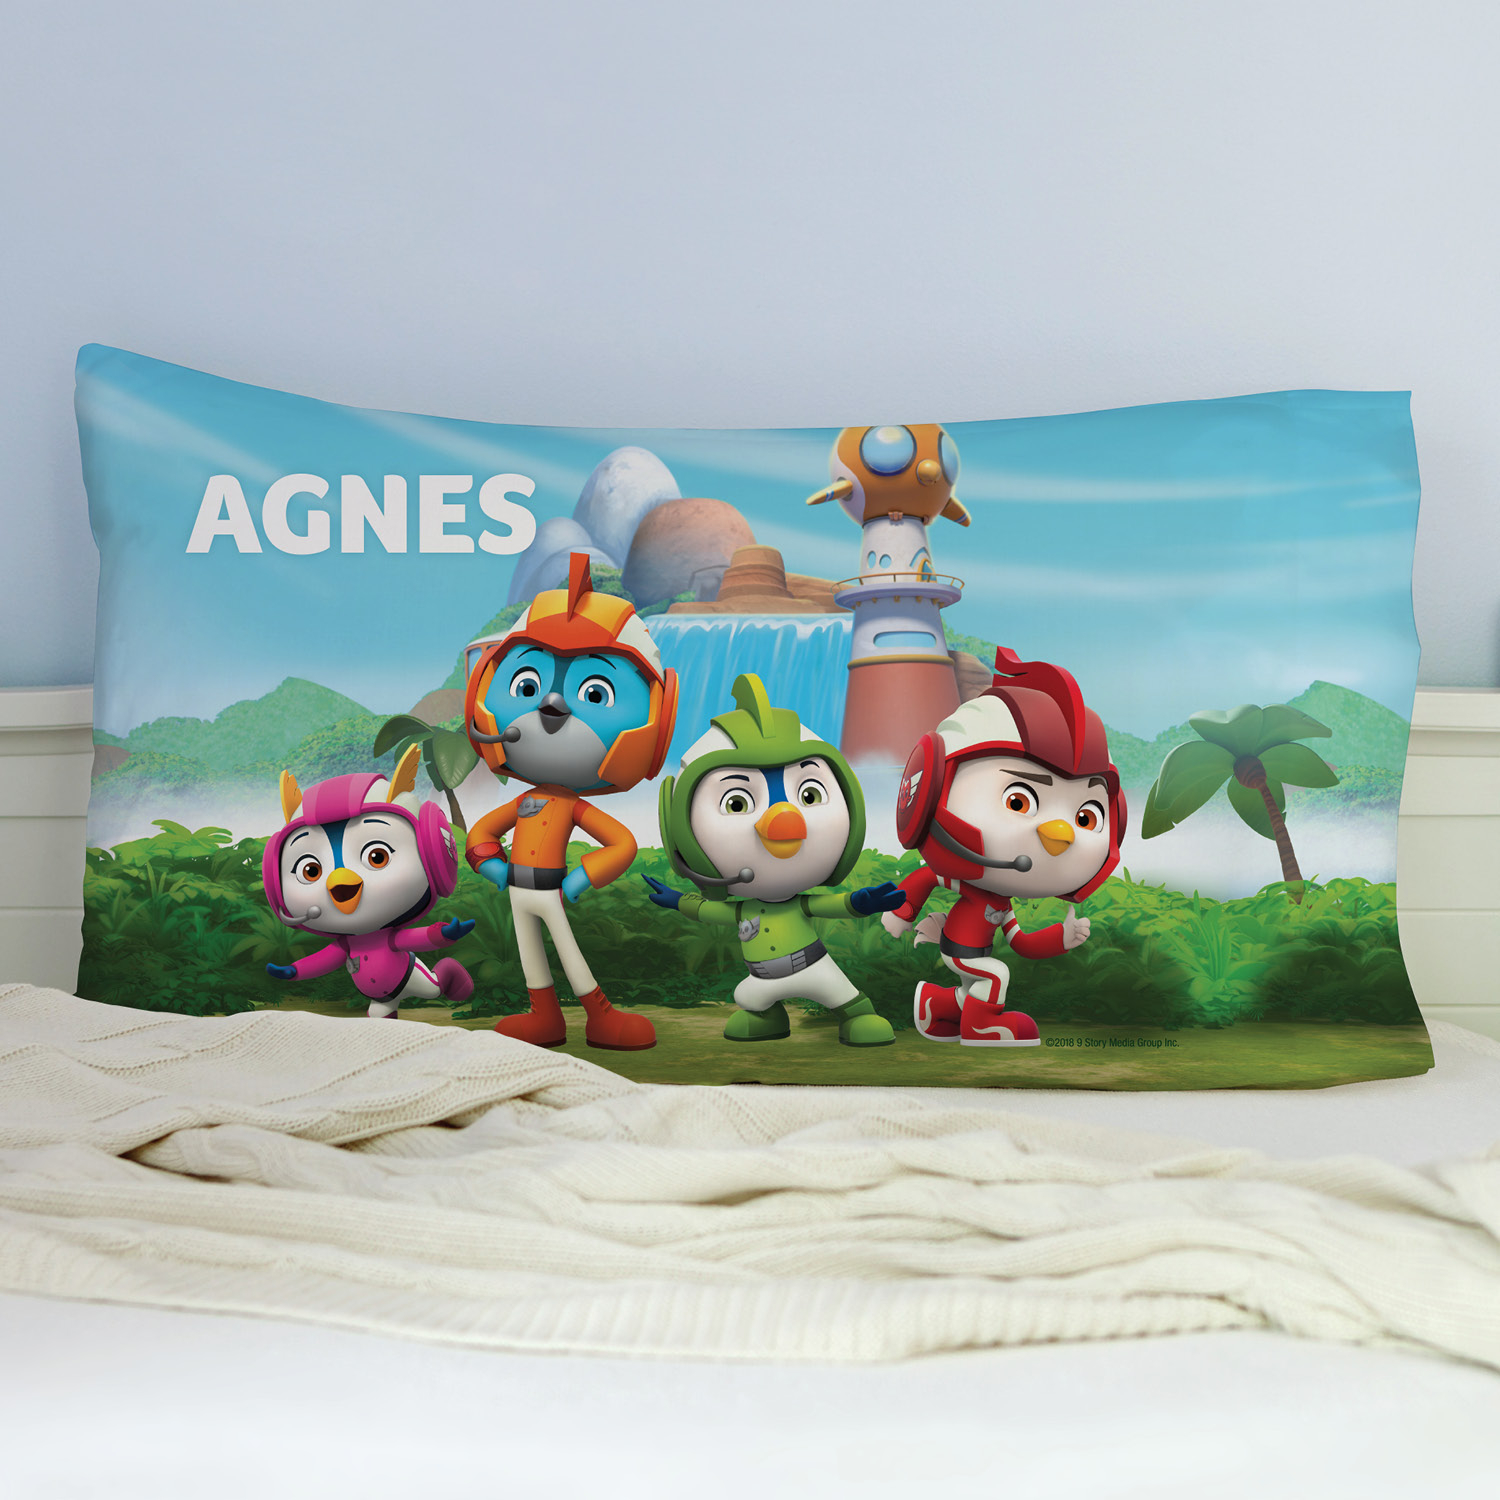 Top Wing Personalized Pillowcase